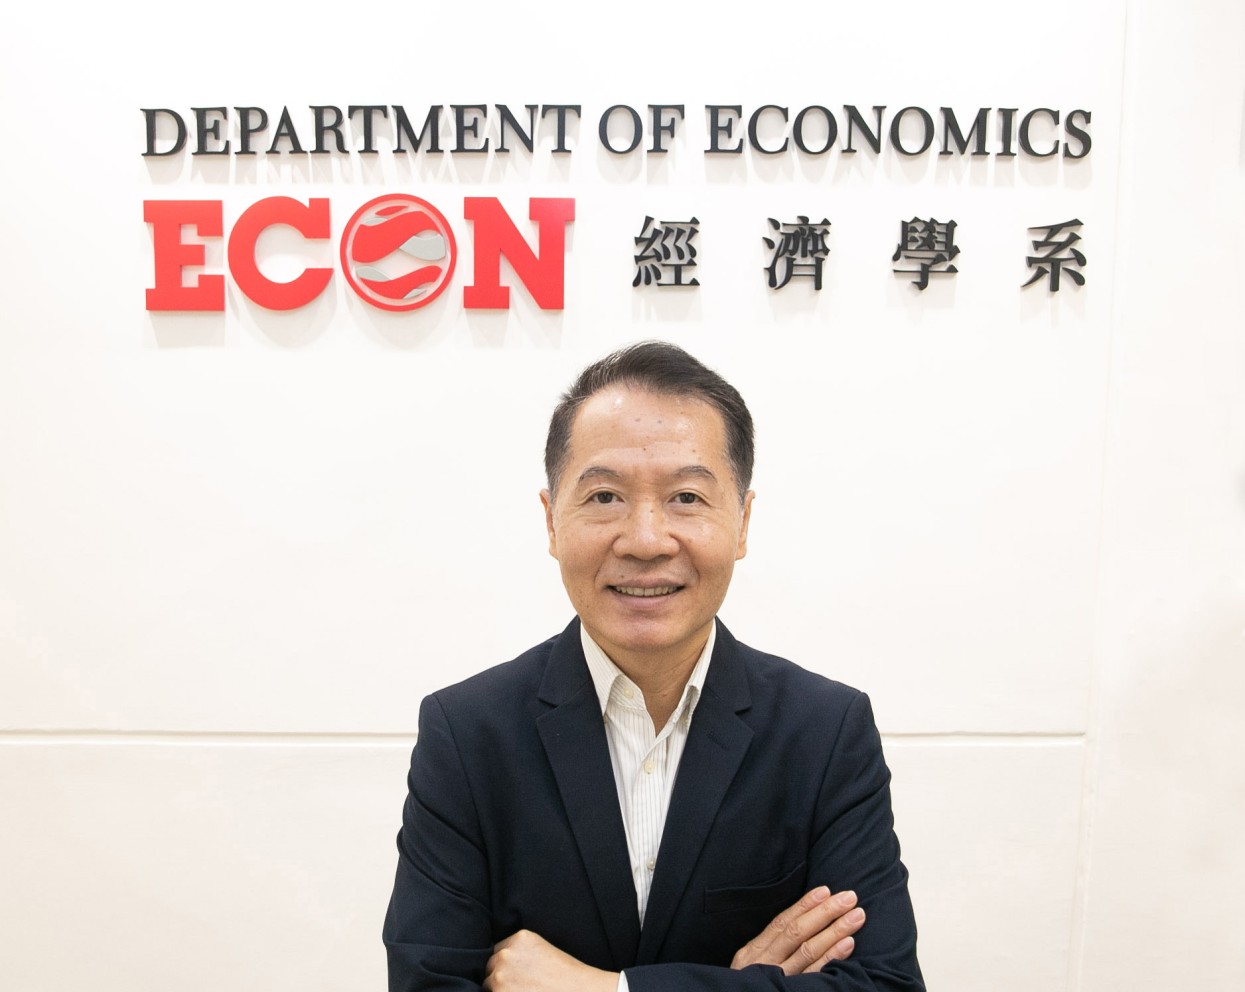 Applying economics to his leading role: Prof Larry Qiu Dongxiao